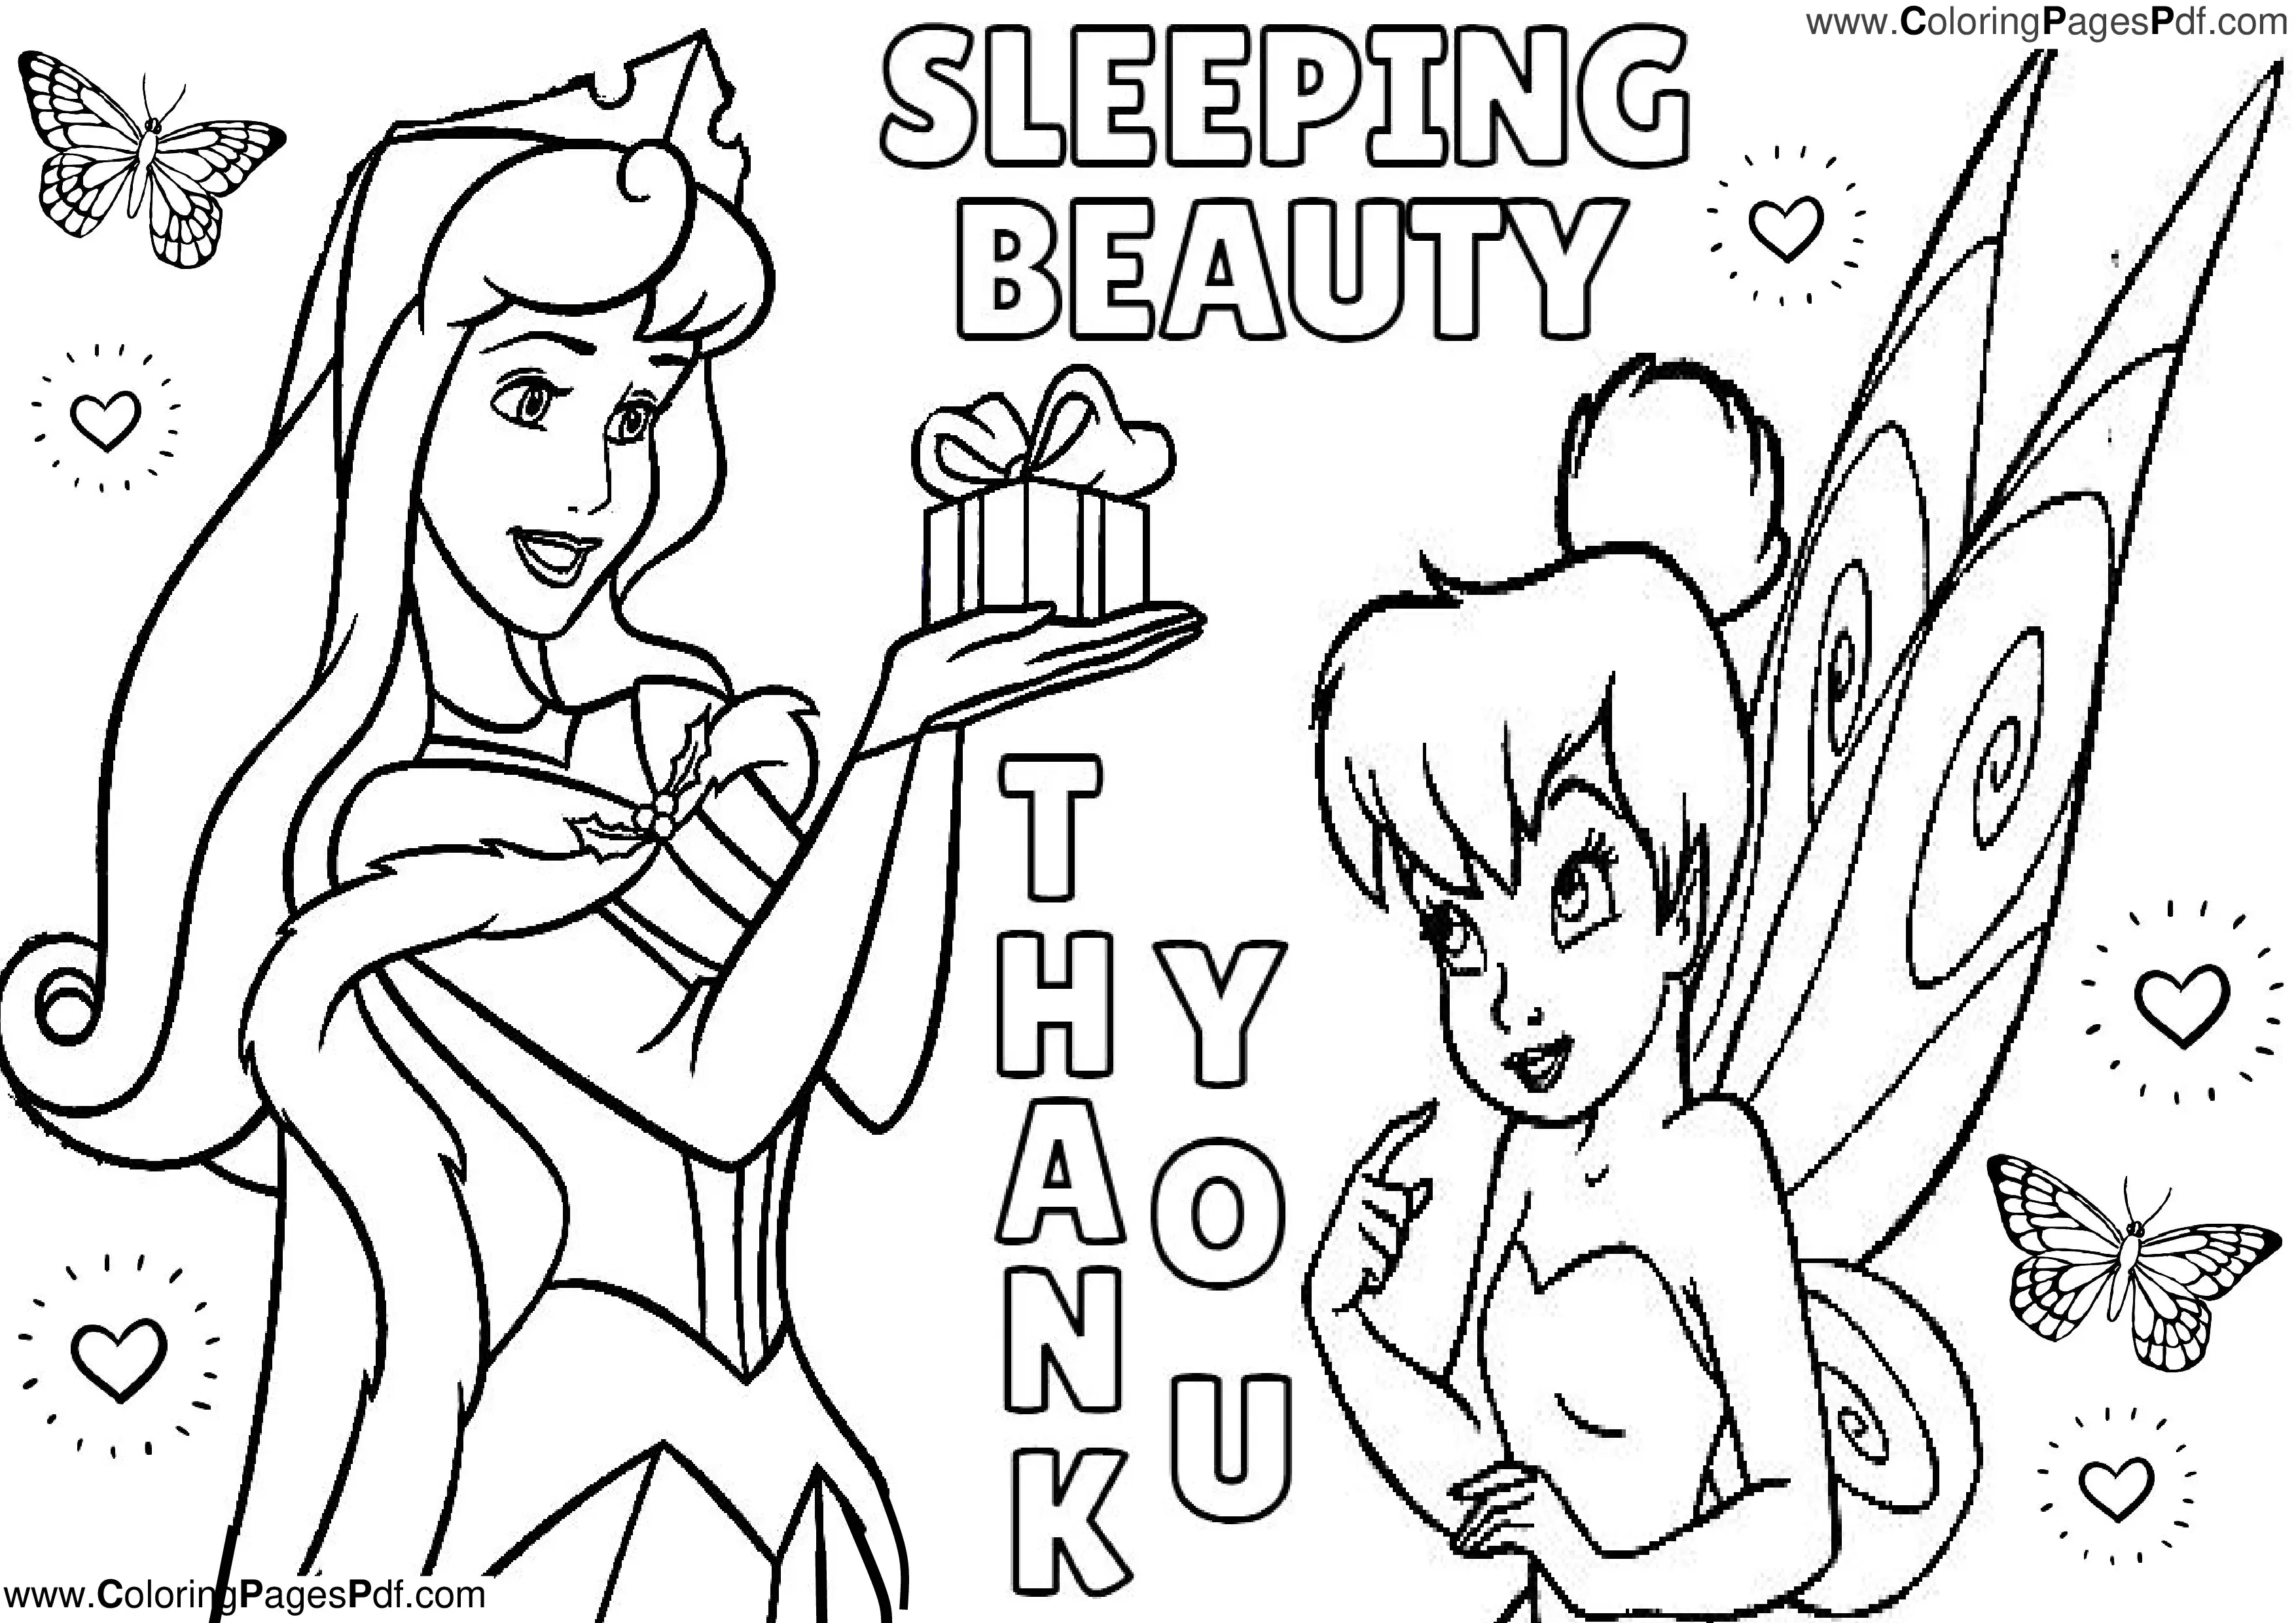 Tinkerbell & sleeping beauty coloring pages